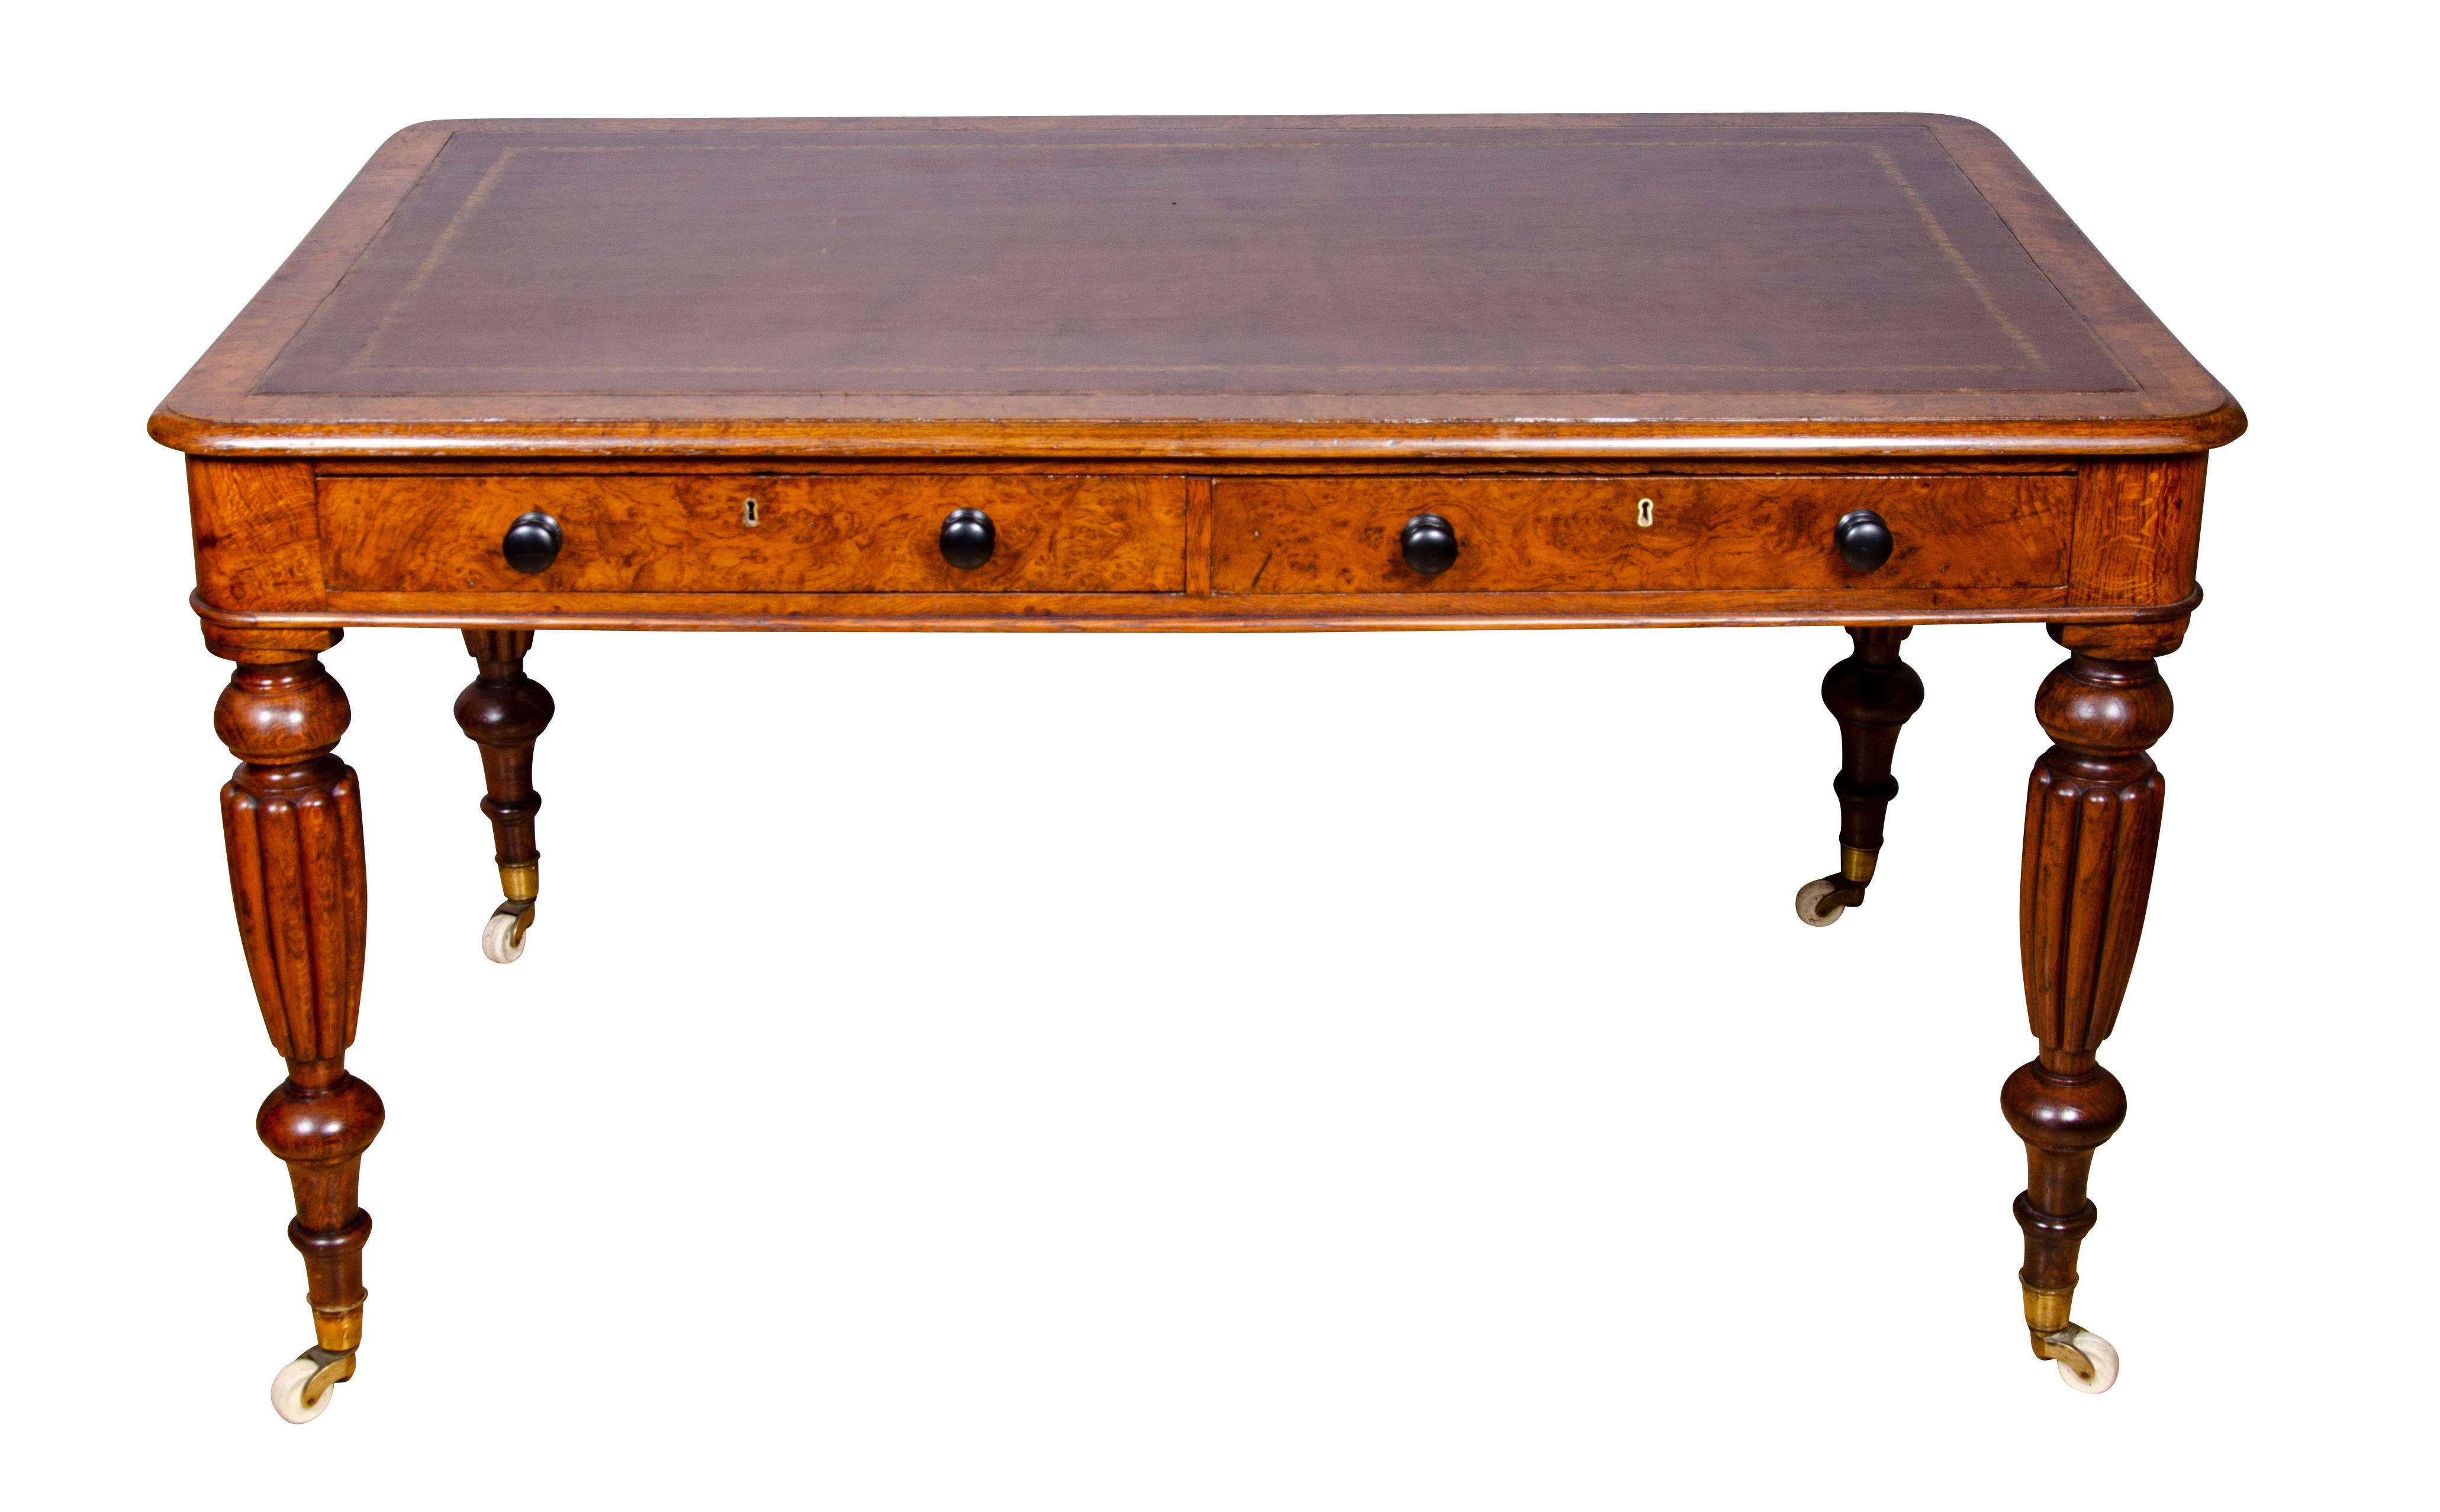 Rectangular with brown leather set in with framed border and rounded edge over two drawers with wood knobs, same configuration on reverse, raised on turned reeded legs ending on casters.